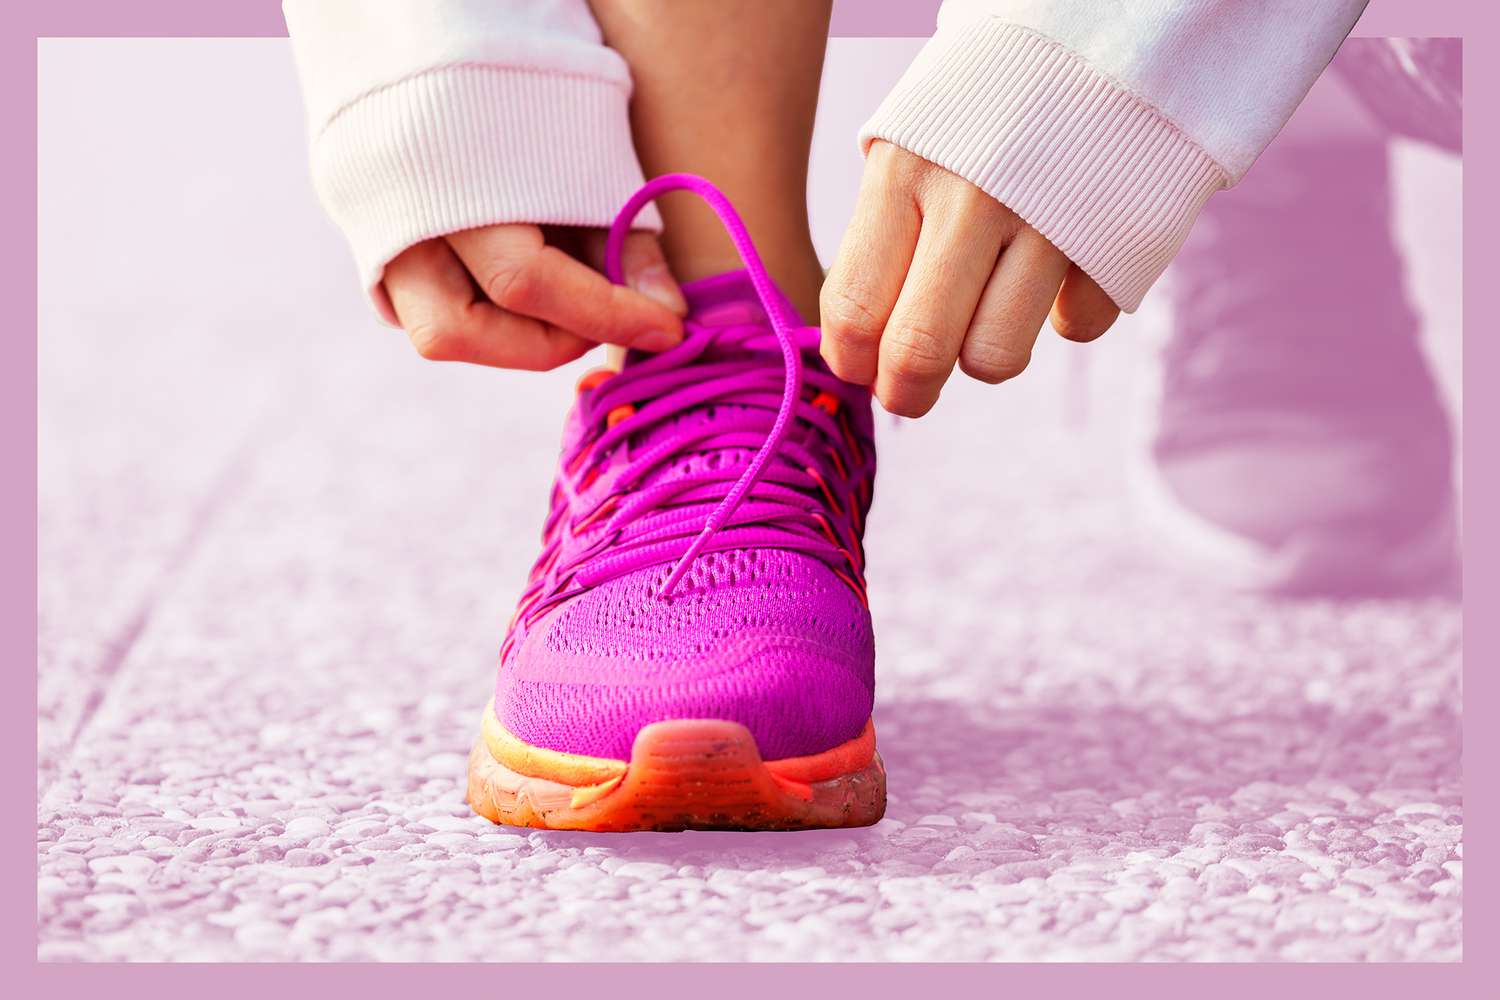 Hands of young woman lacing pink sneakers